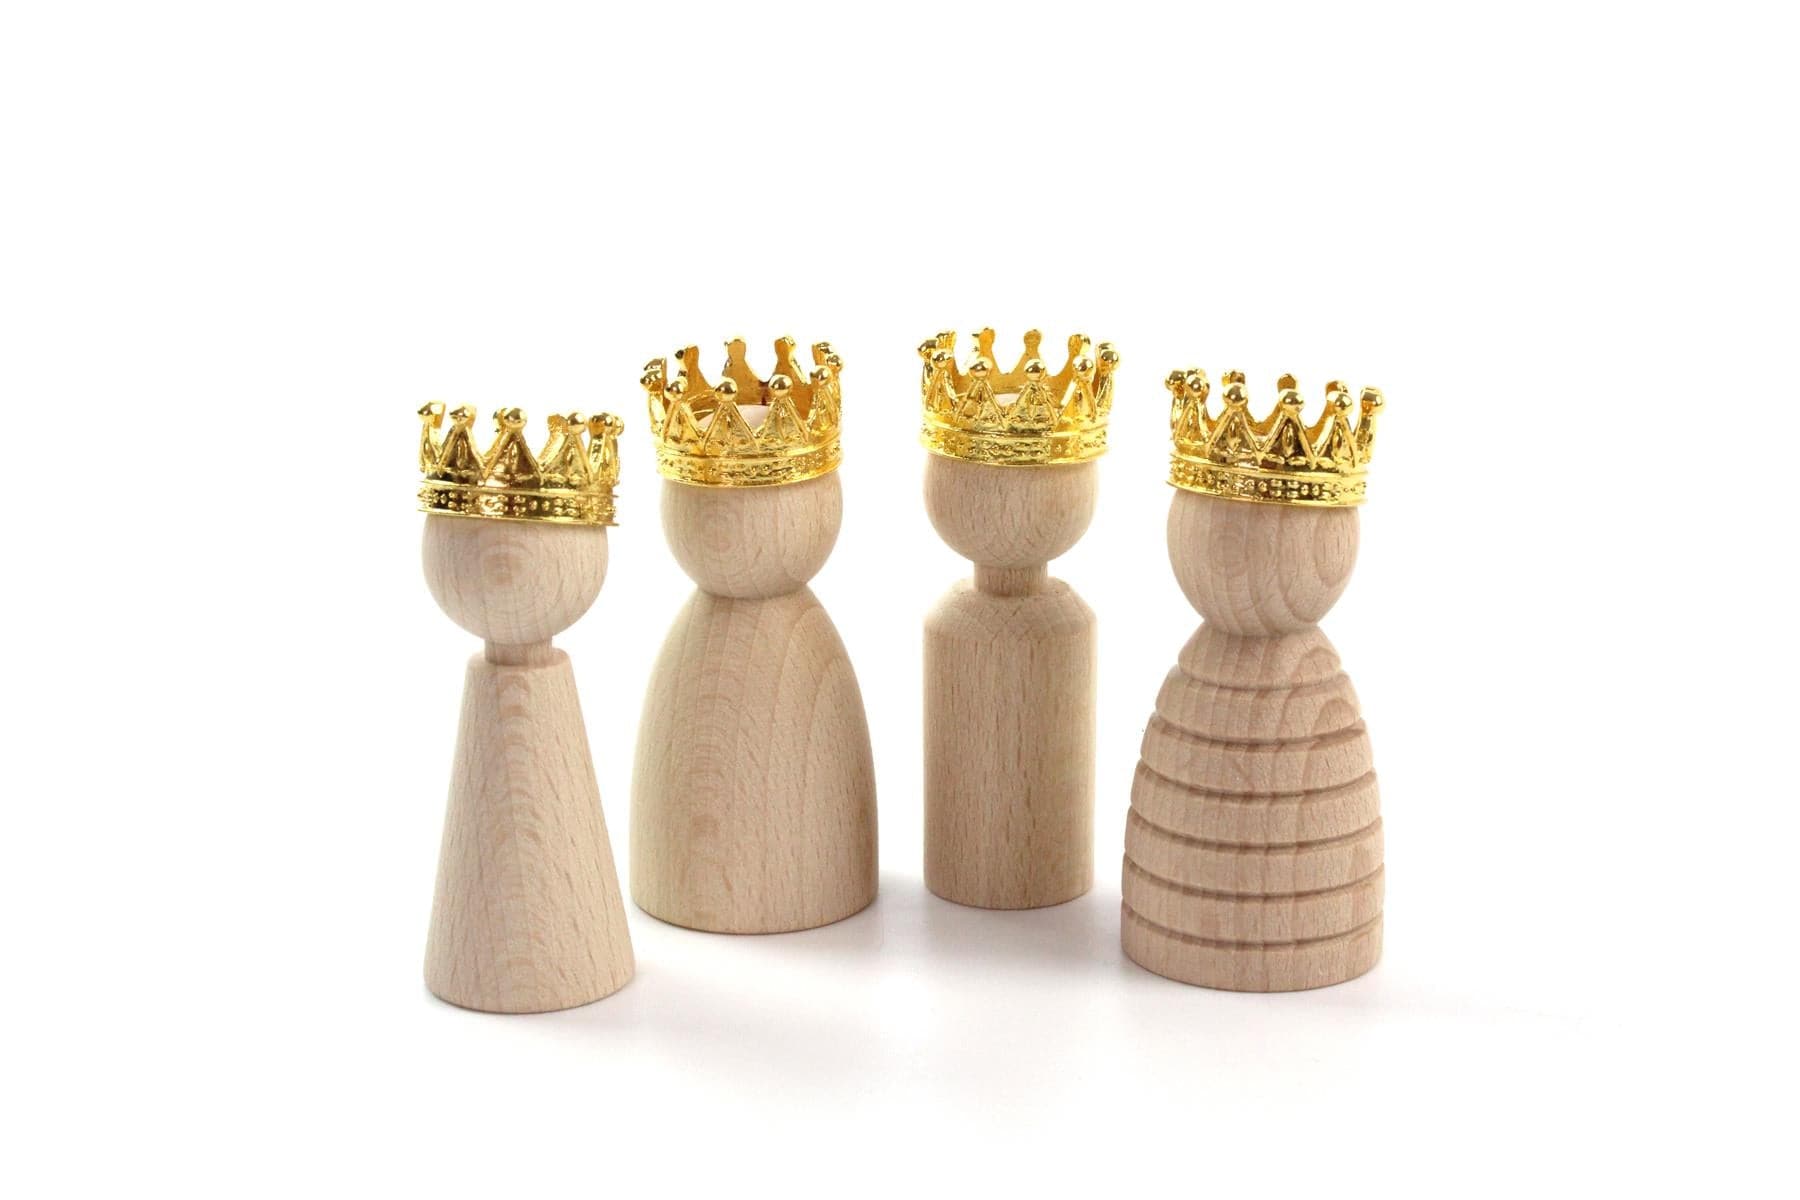 3x Large Gold Crowns - The Makerss